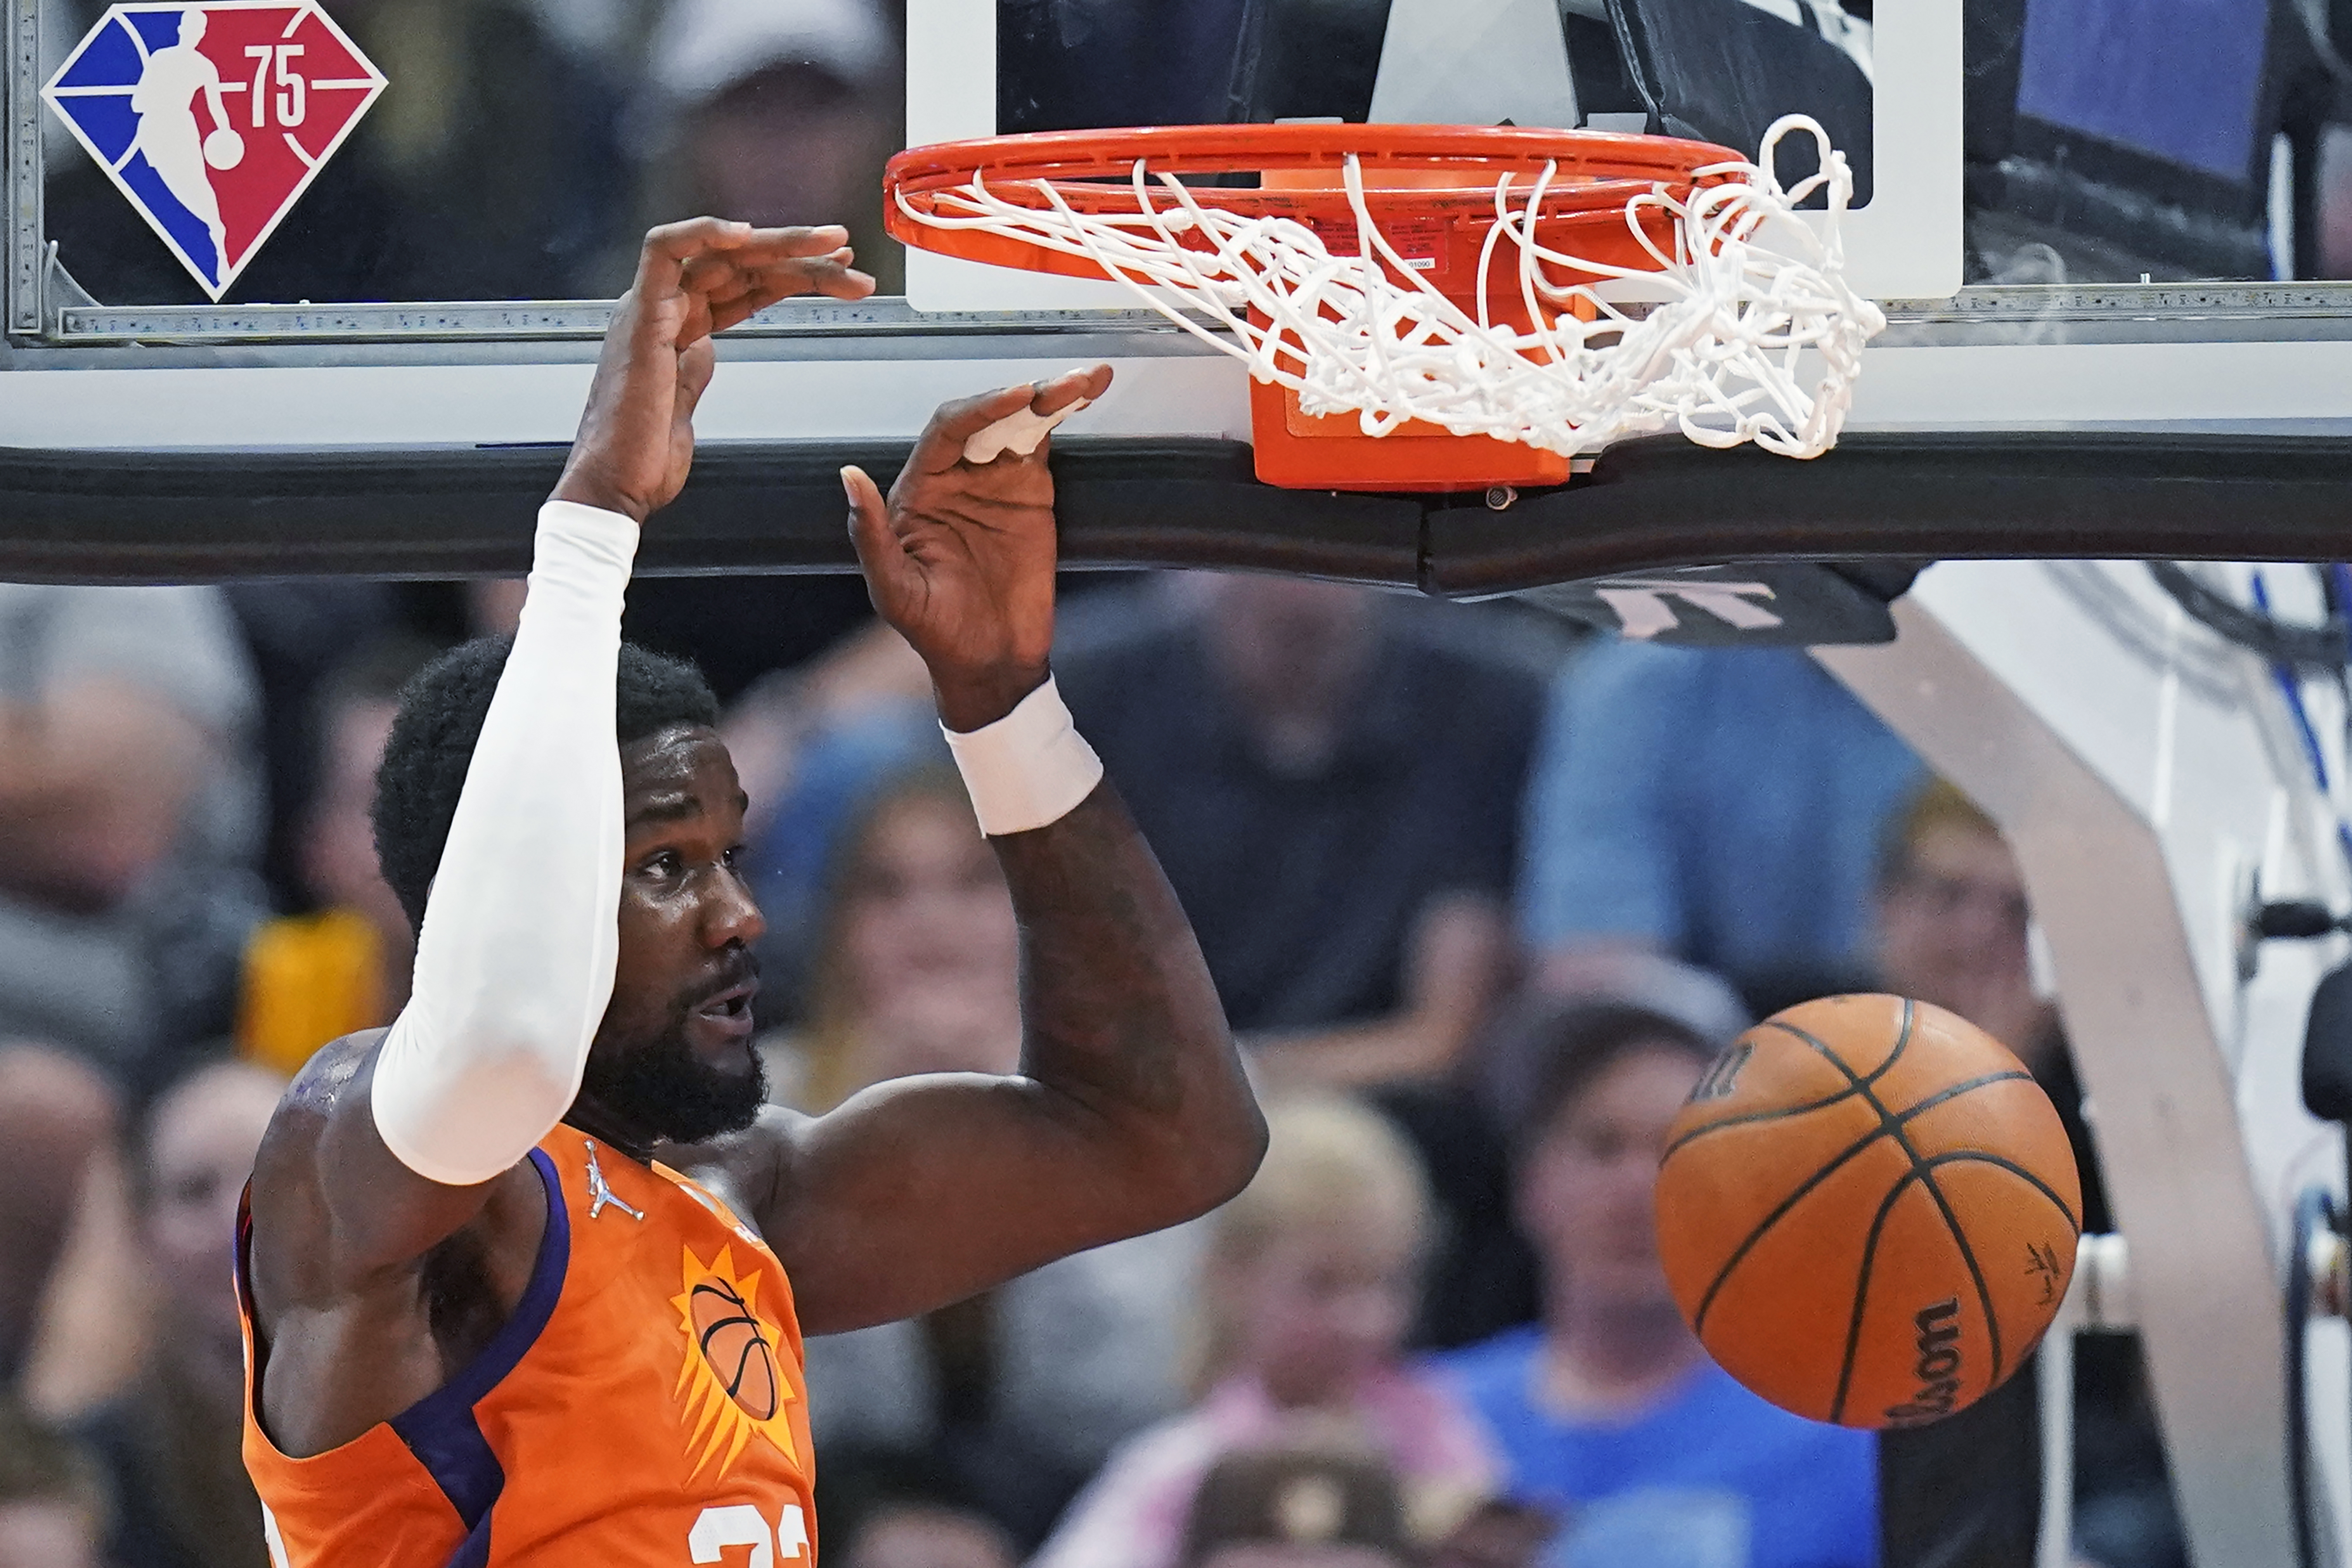 NBA-best Suns overcome 17-point deficit in 4th to beat Jazz